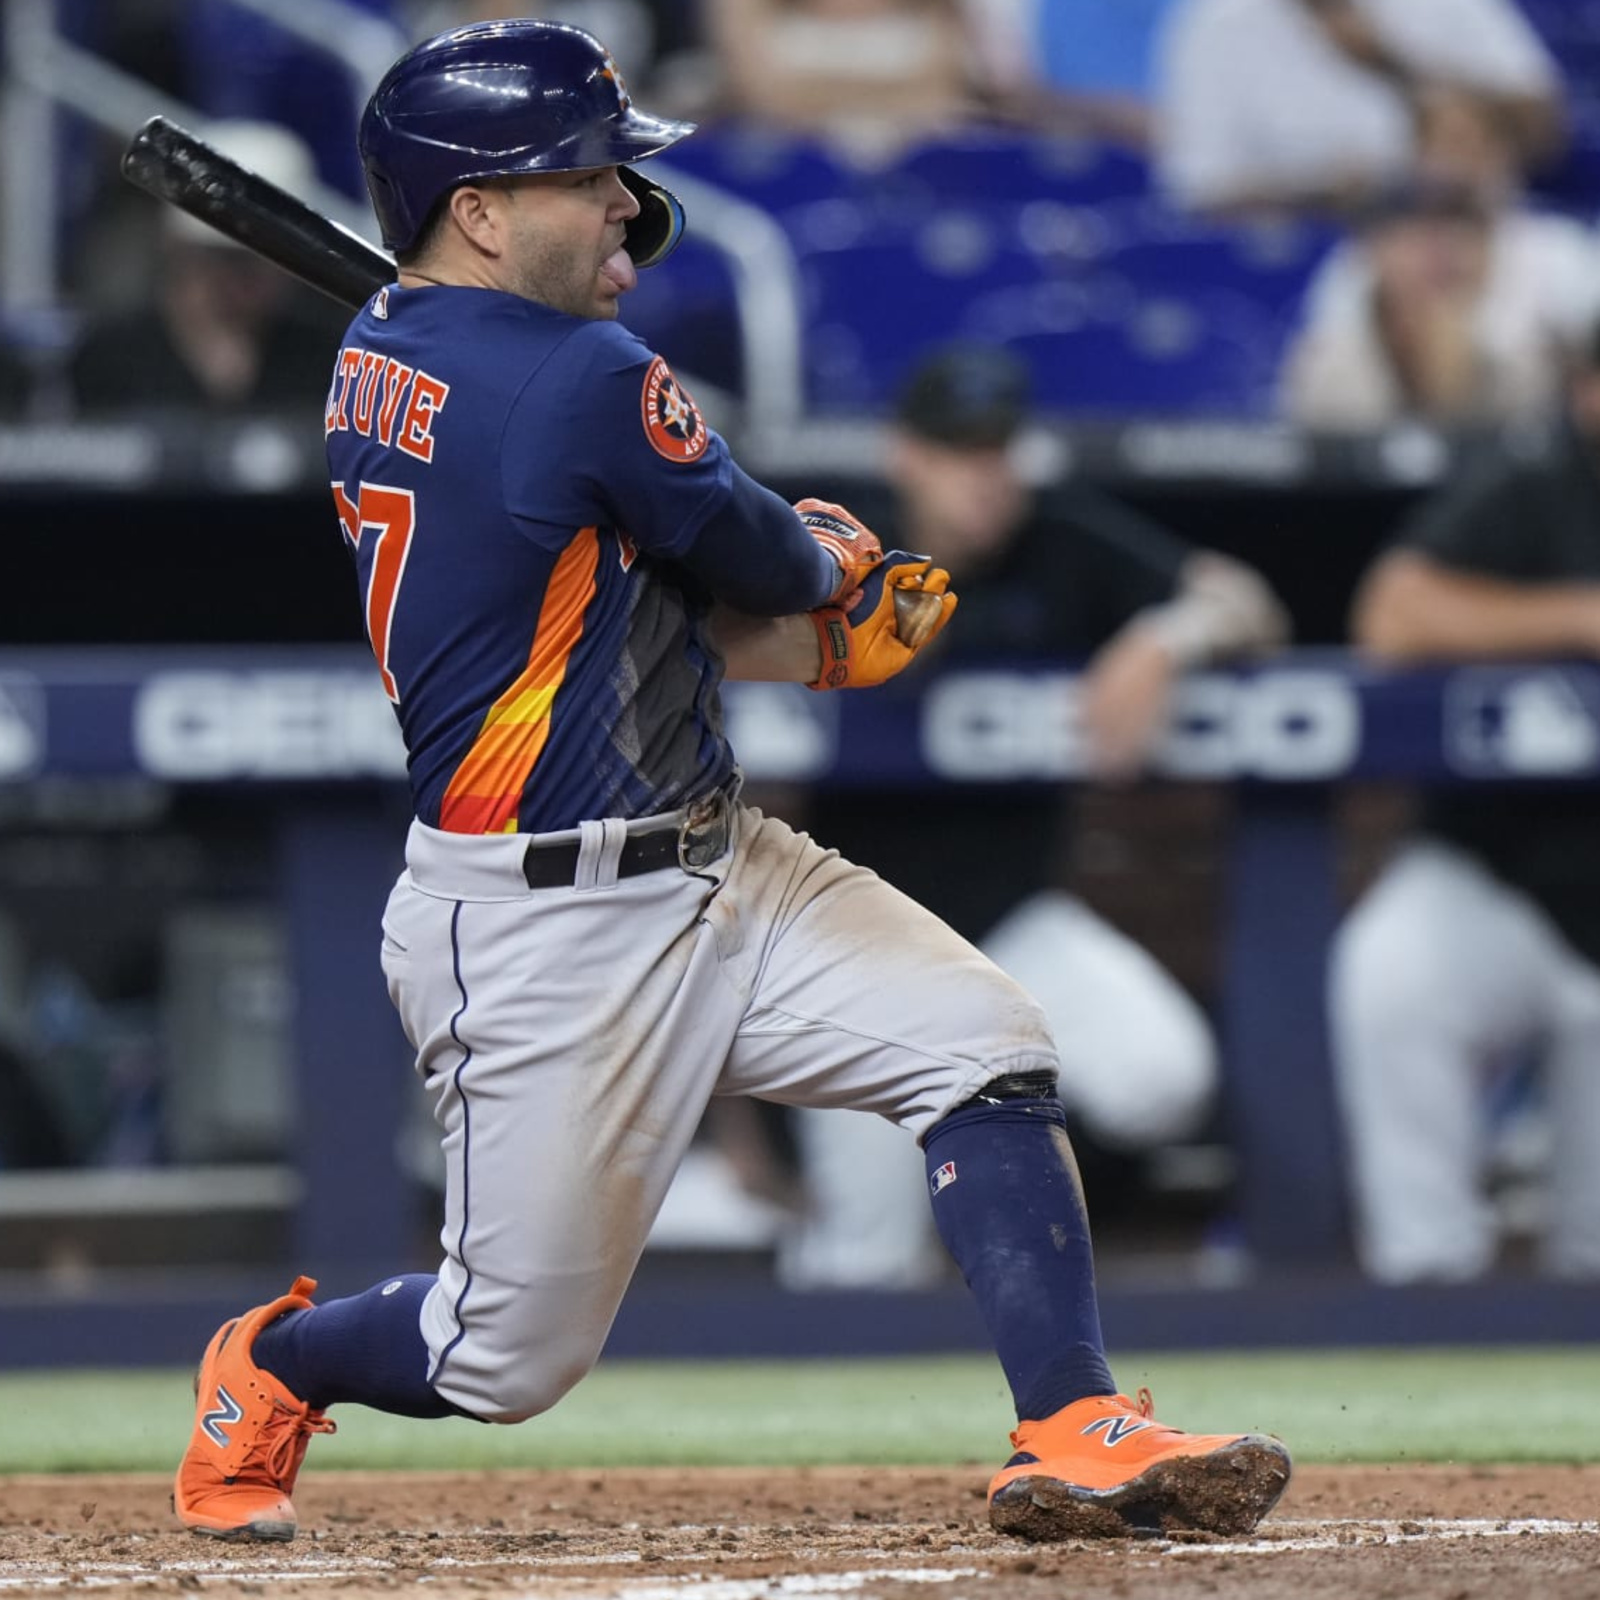 Astros' Jose Altuve leaves shortly after getting hit by pitch - NBC Sports